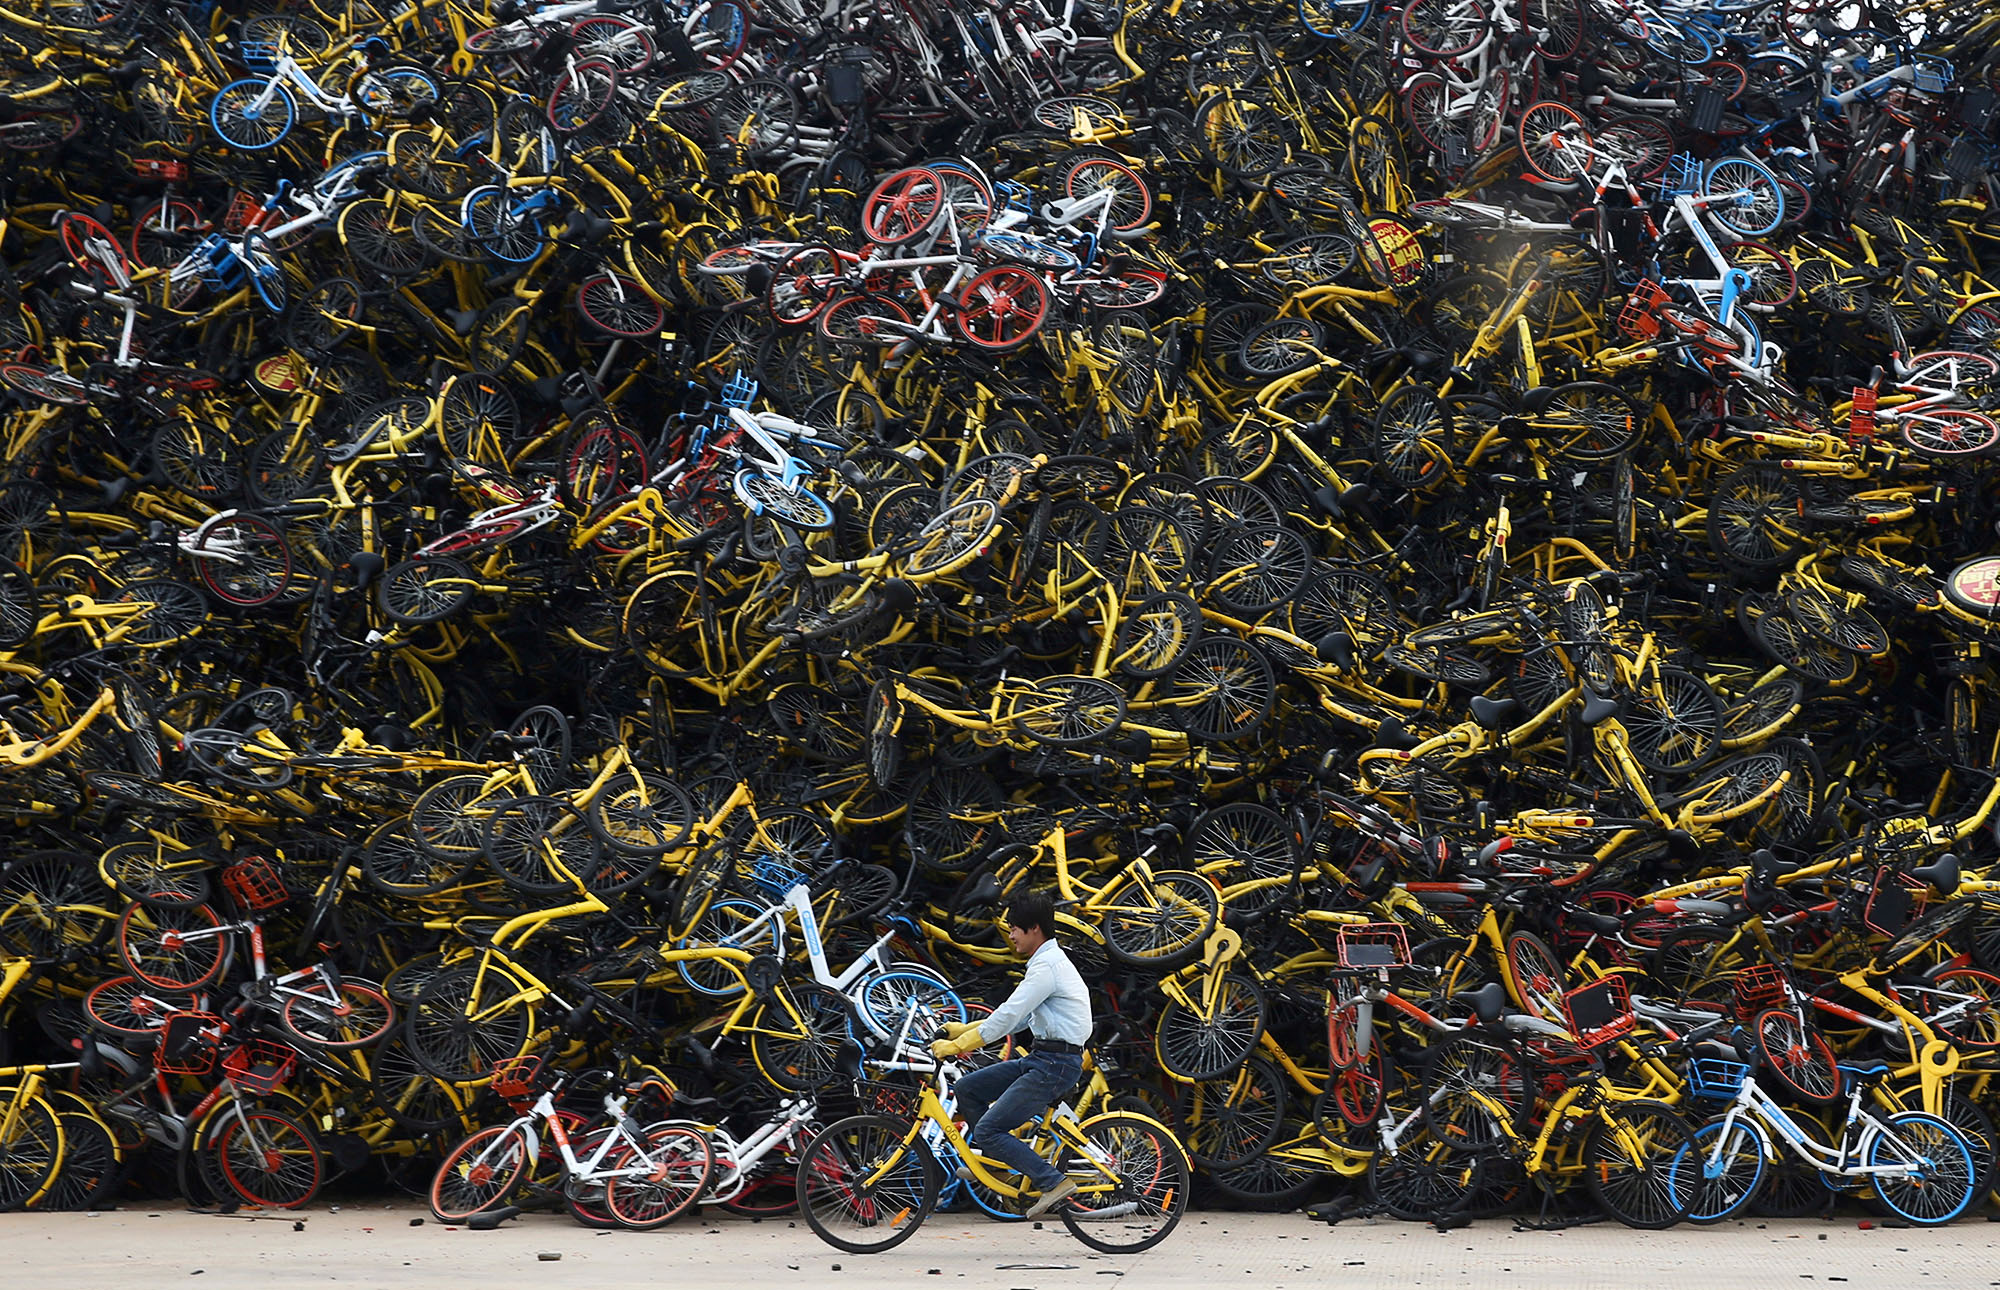 Bike Share Oversupply in China Huge Piles of Abandoned and Broken Bicycles 